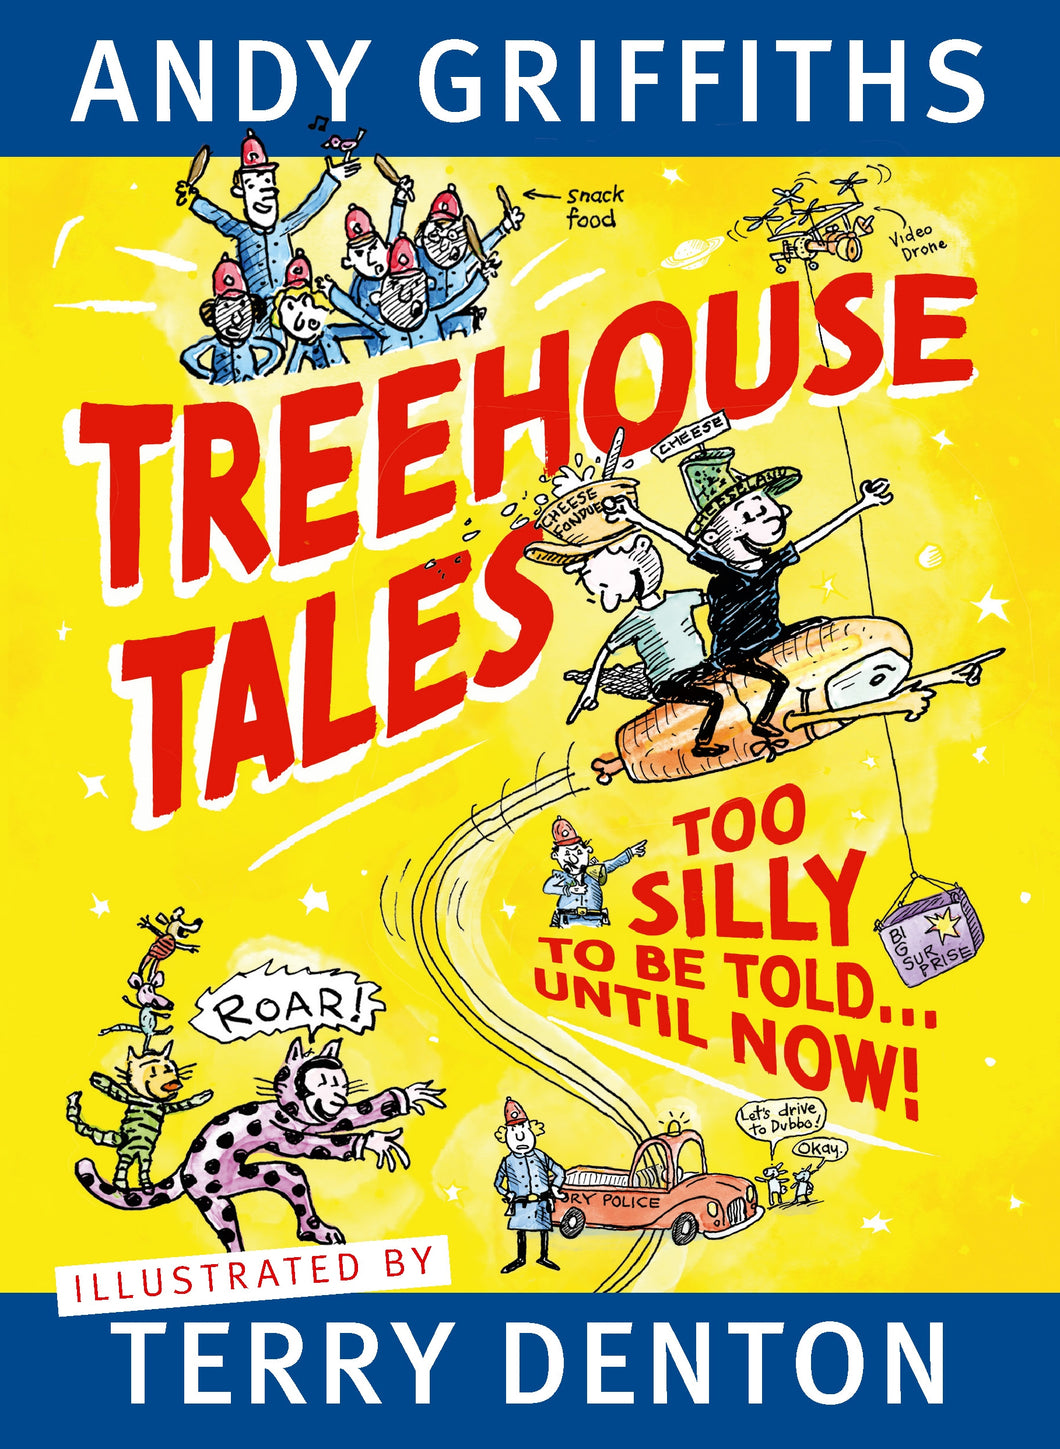 Treehouse Tales by Andy Griffiths and Terry Denton